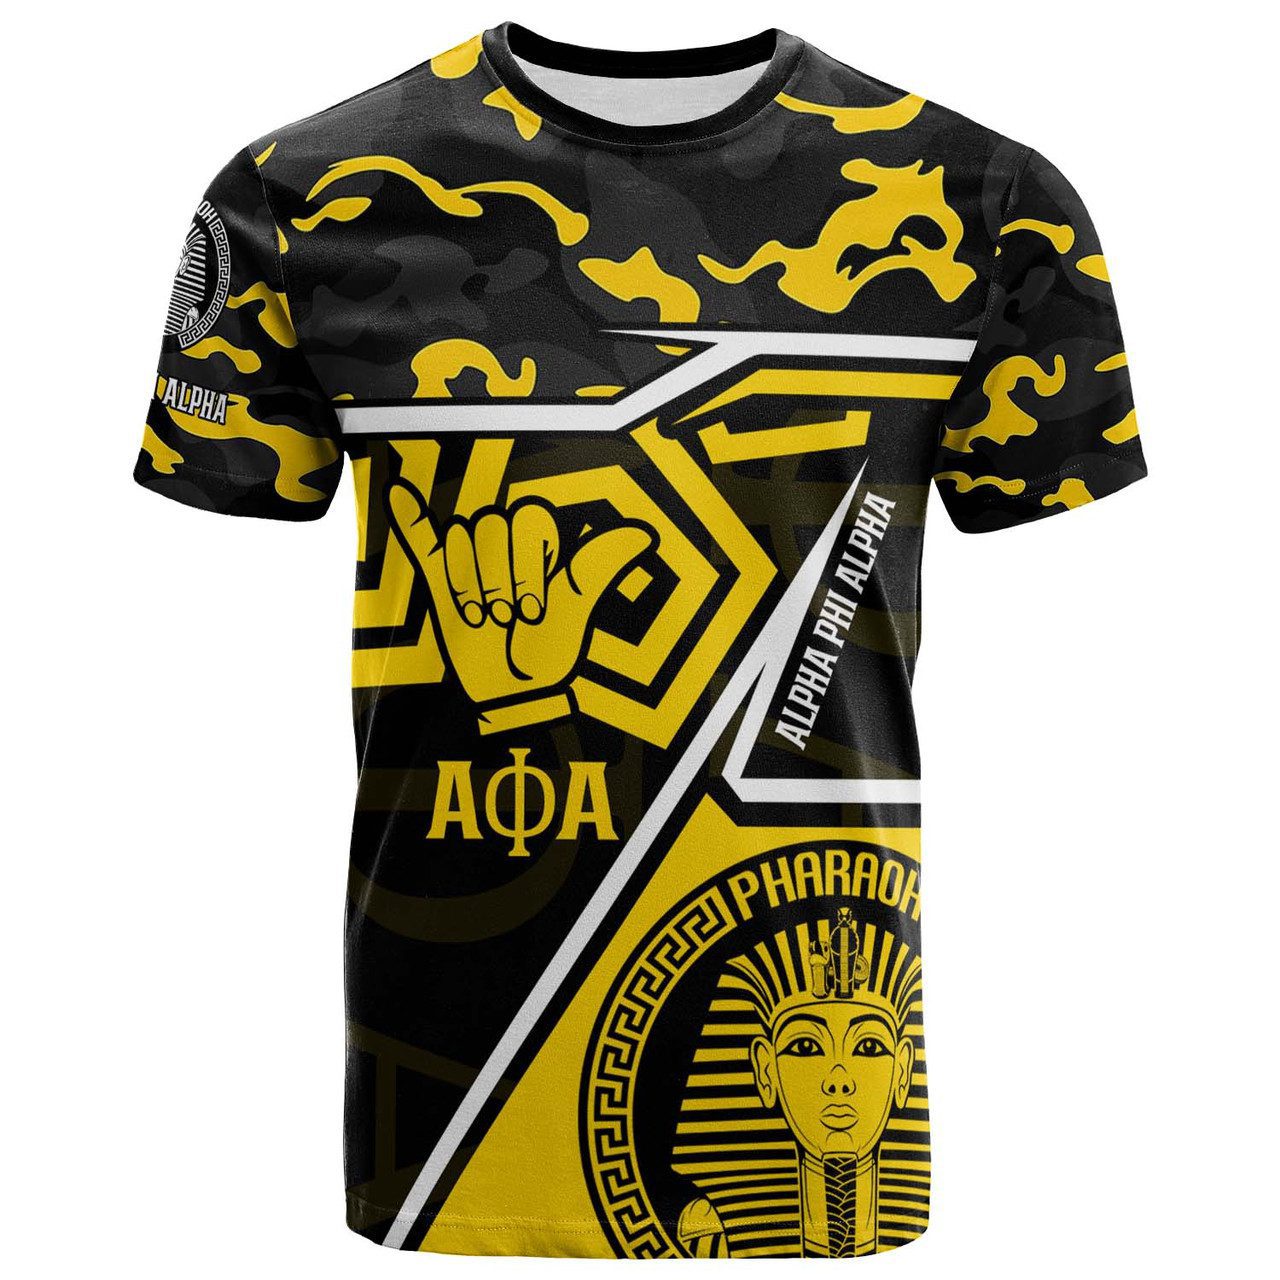 Alpha Phi Alpha T-shirt – Fraternity Alpha Phi Alpha Hand Sign with Camouflage Pattern T-shirt